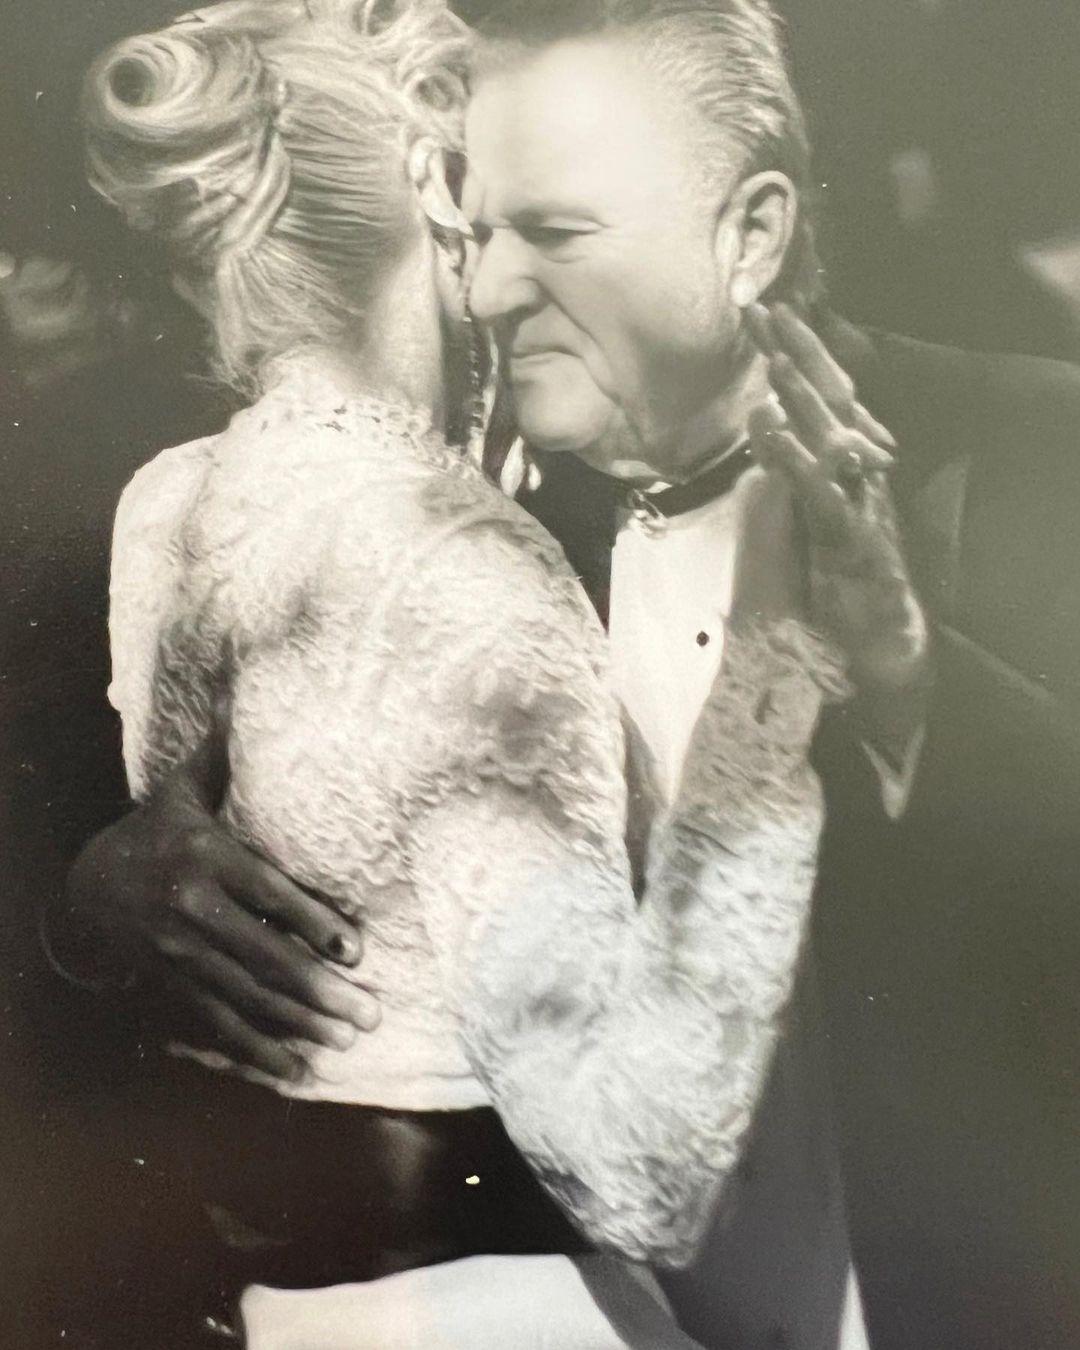 Shanna Moakler Lauds Her Dad As 'The Most Amazing Man' In Sweet Father's Day Tribute